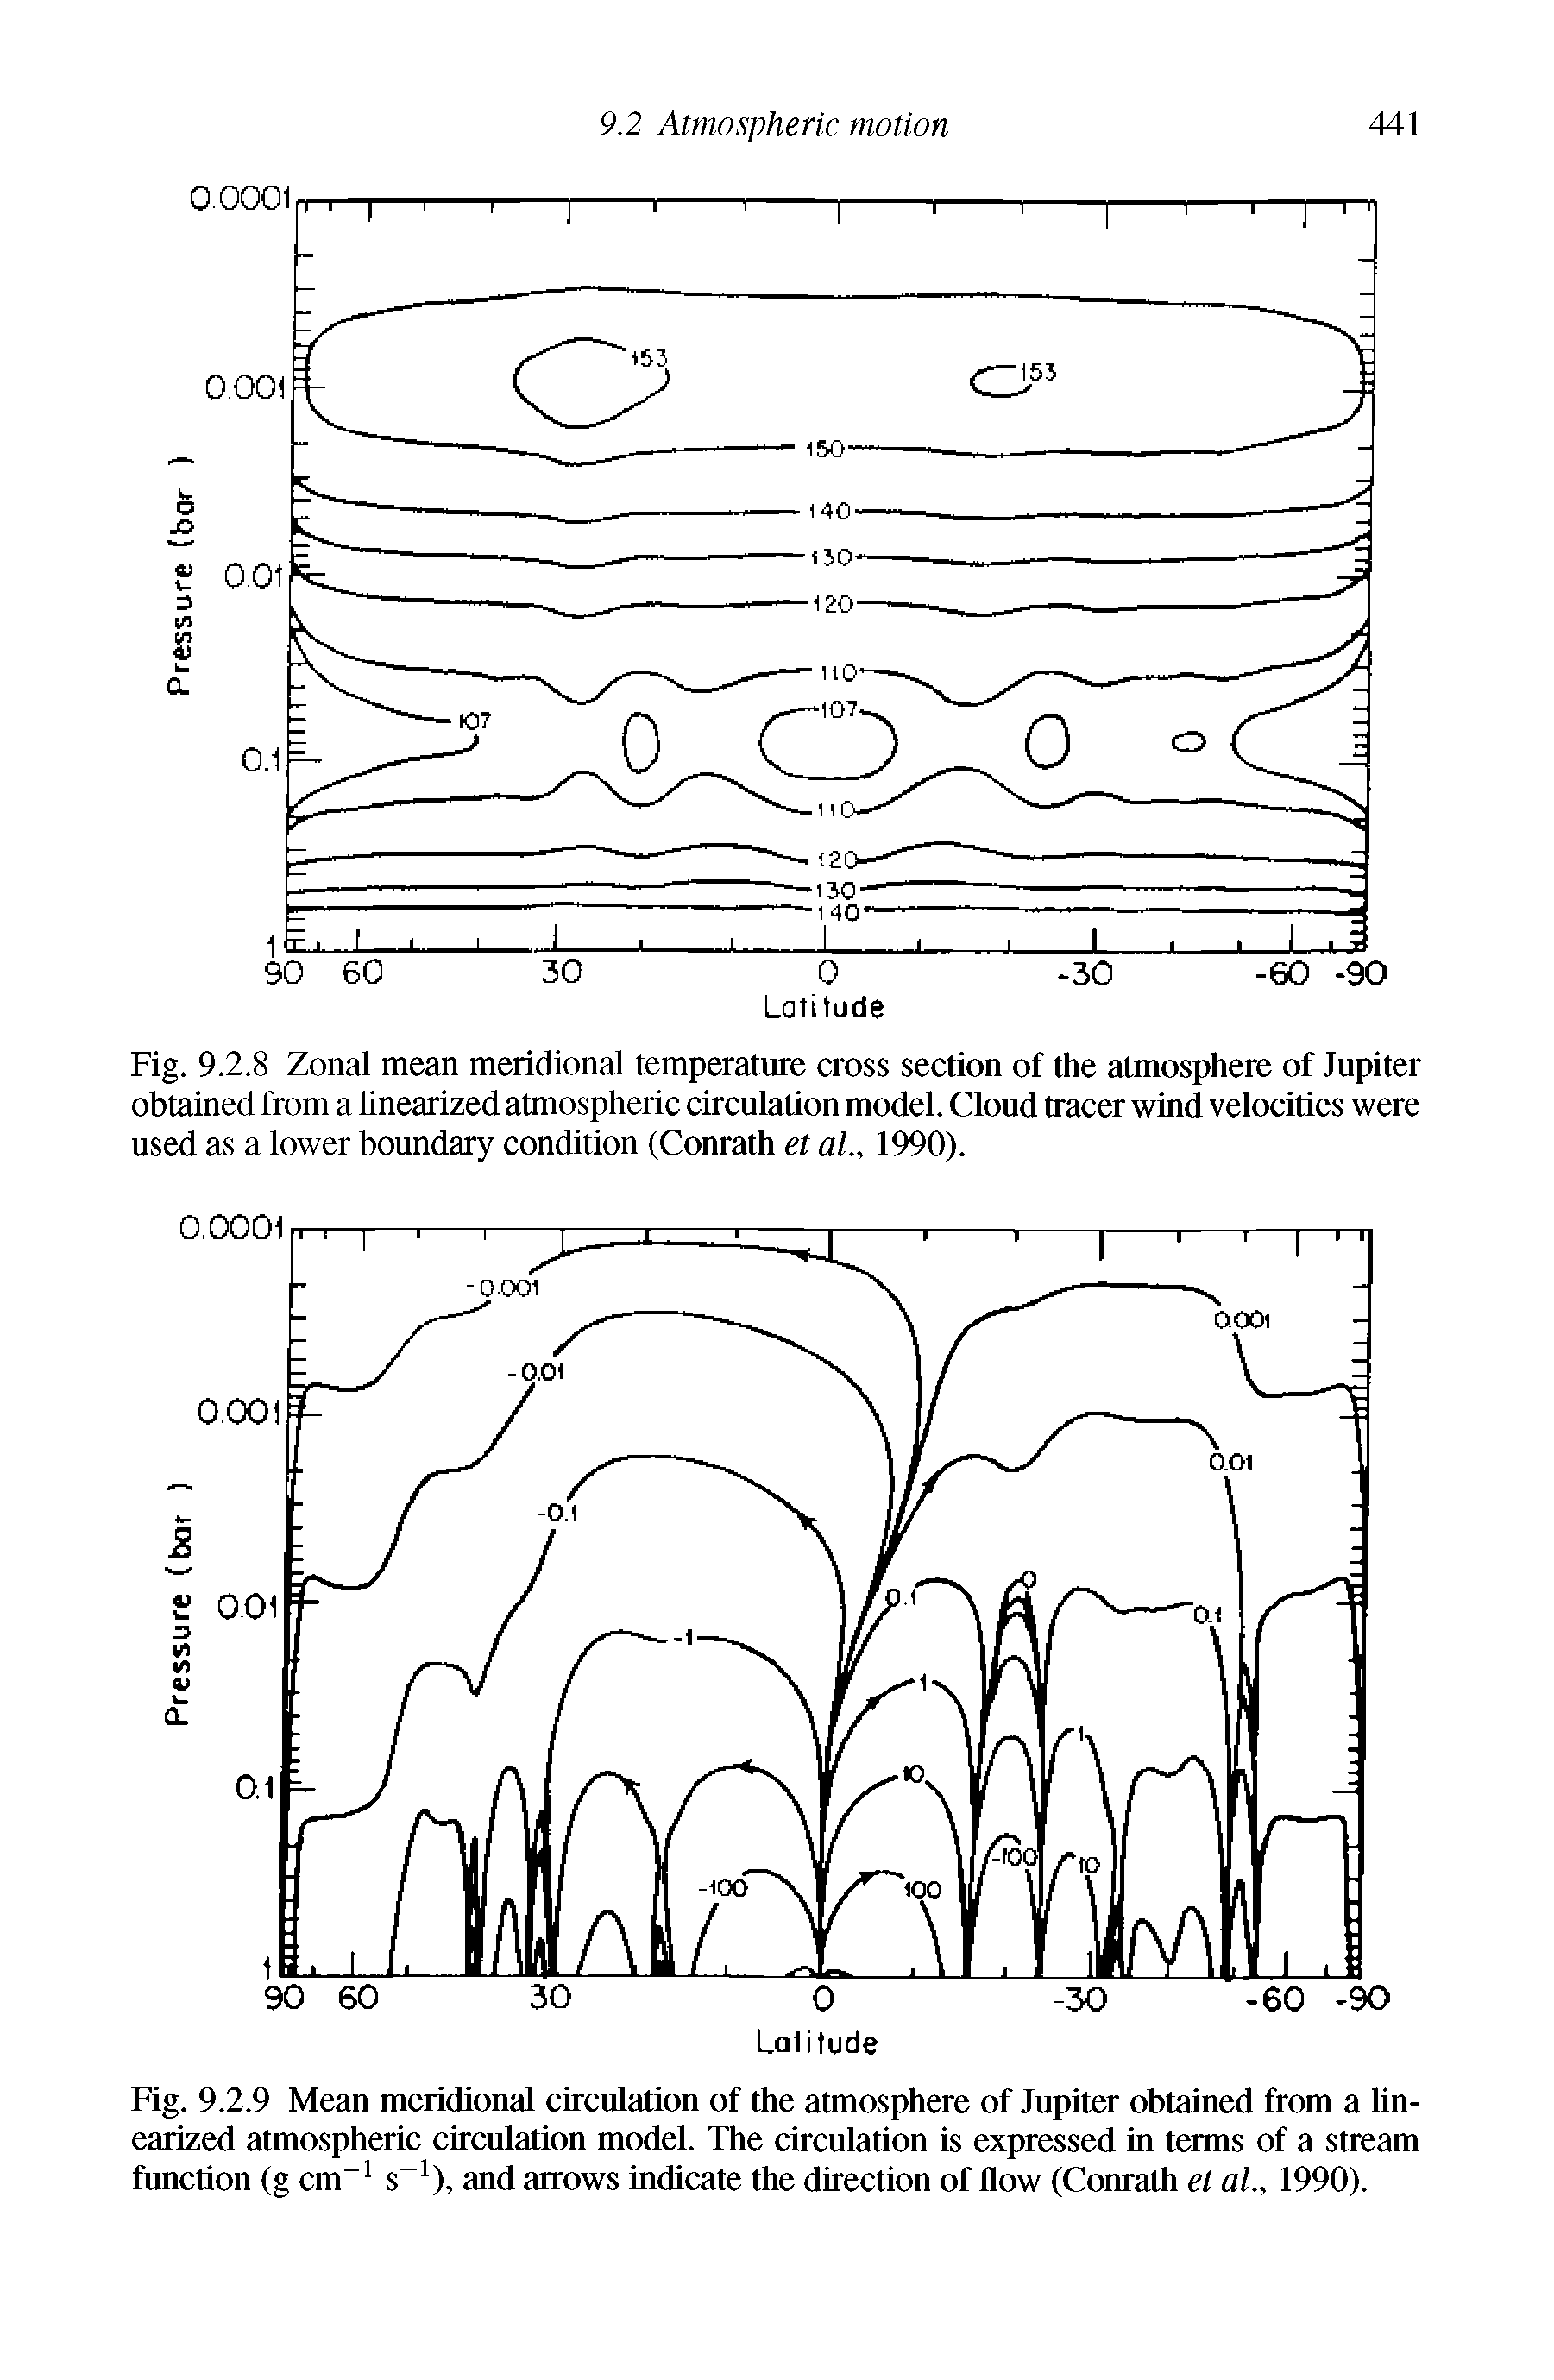 Fig. 9.2.8 Zonal mean meridional temperature cross section of the atmosphere of Jupiter obtained from a linearized atmospheric circulation model. Cloud tracer wind velocities were used as a lower boundary condition (Conrath et al 1990).